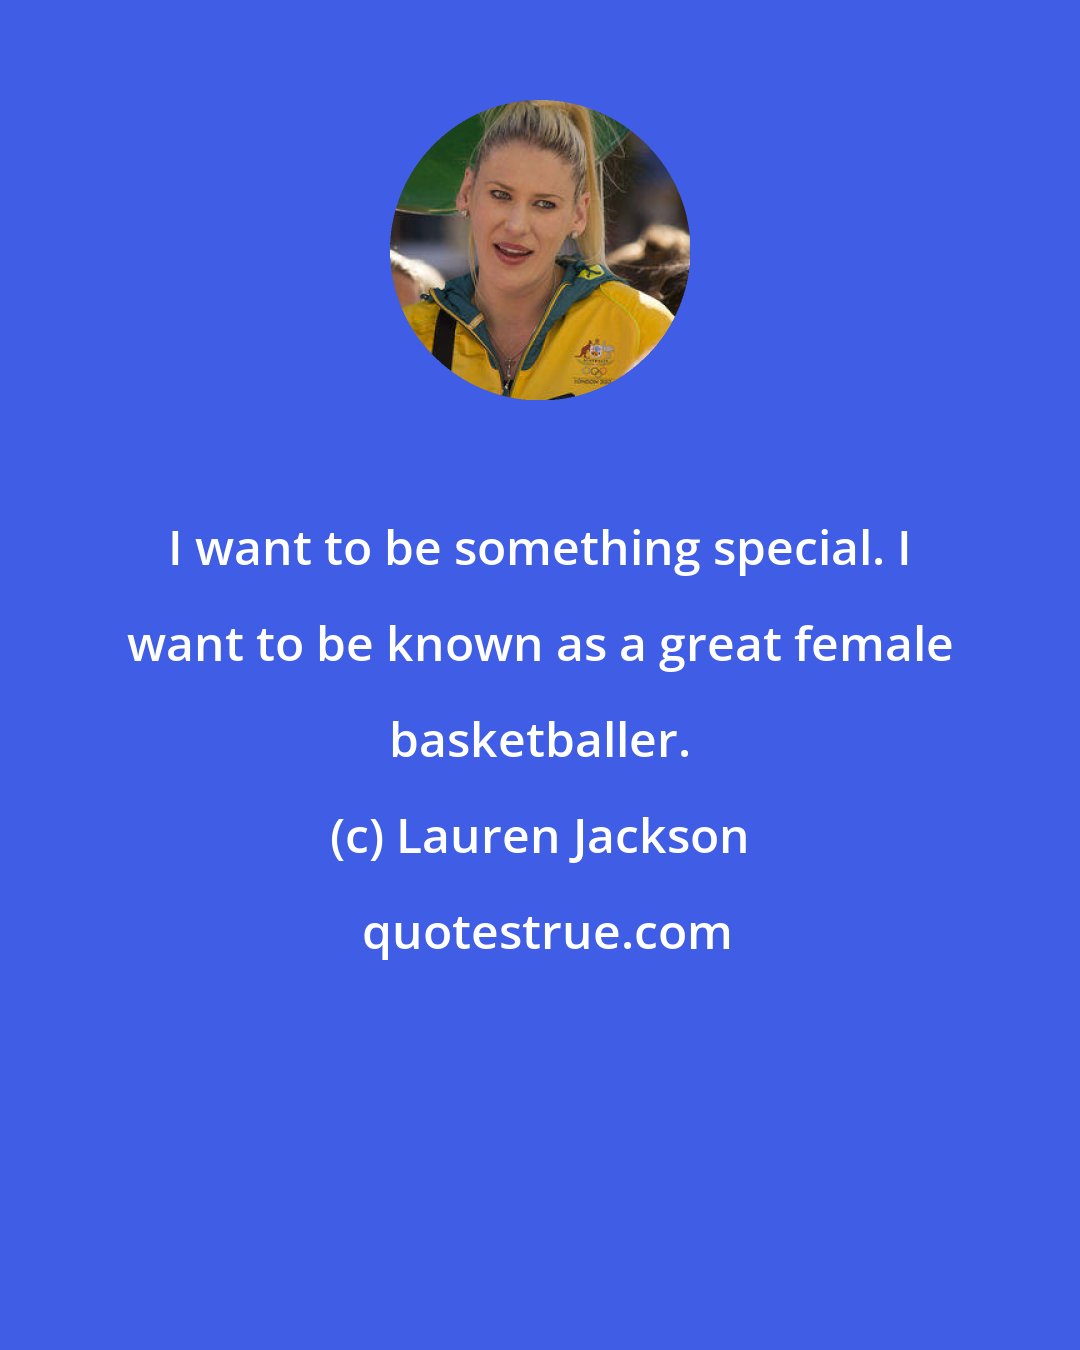 Lauren Jackson: I want to be something special. I want to be known as a great female basketballer.